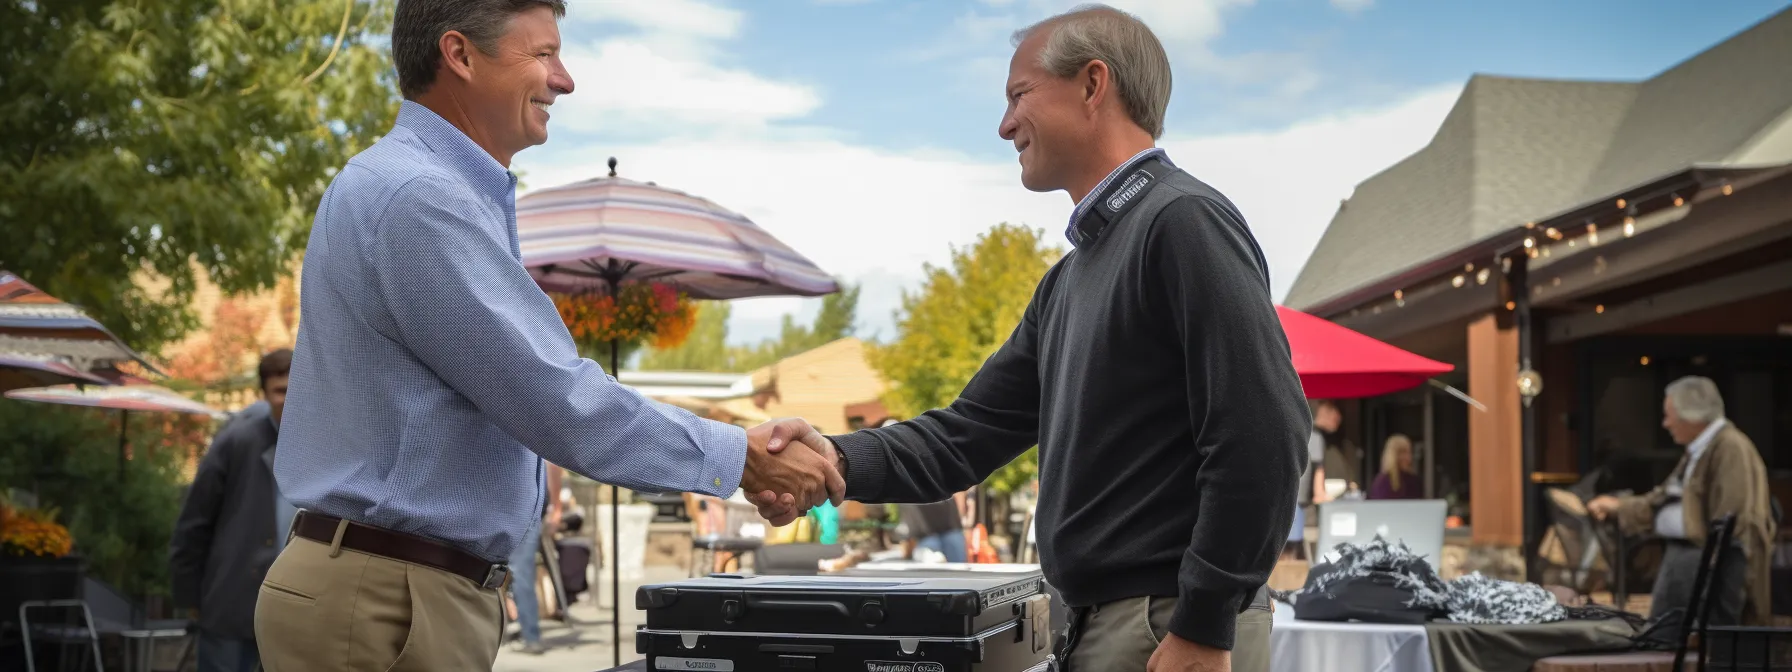 a radio station representative shaking hands with a local business owner at a community event.